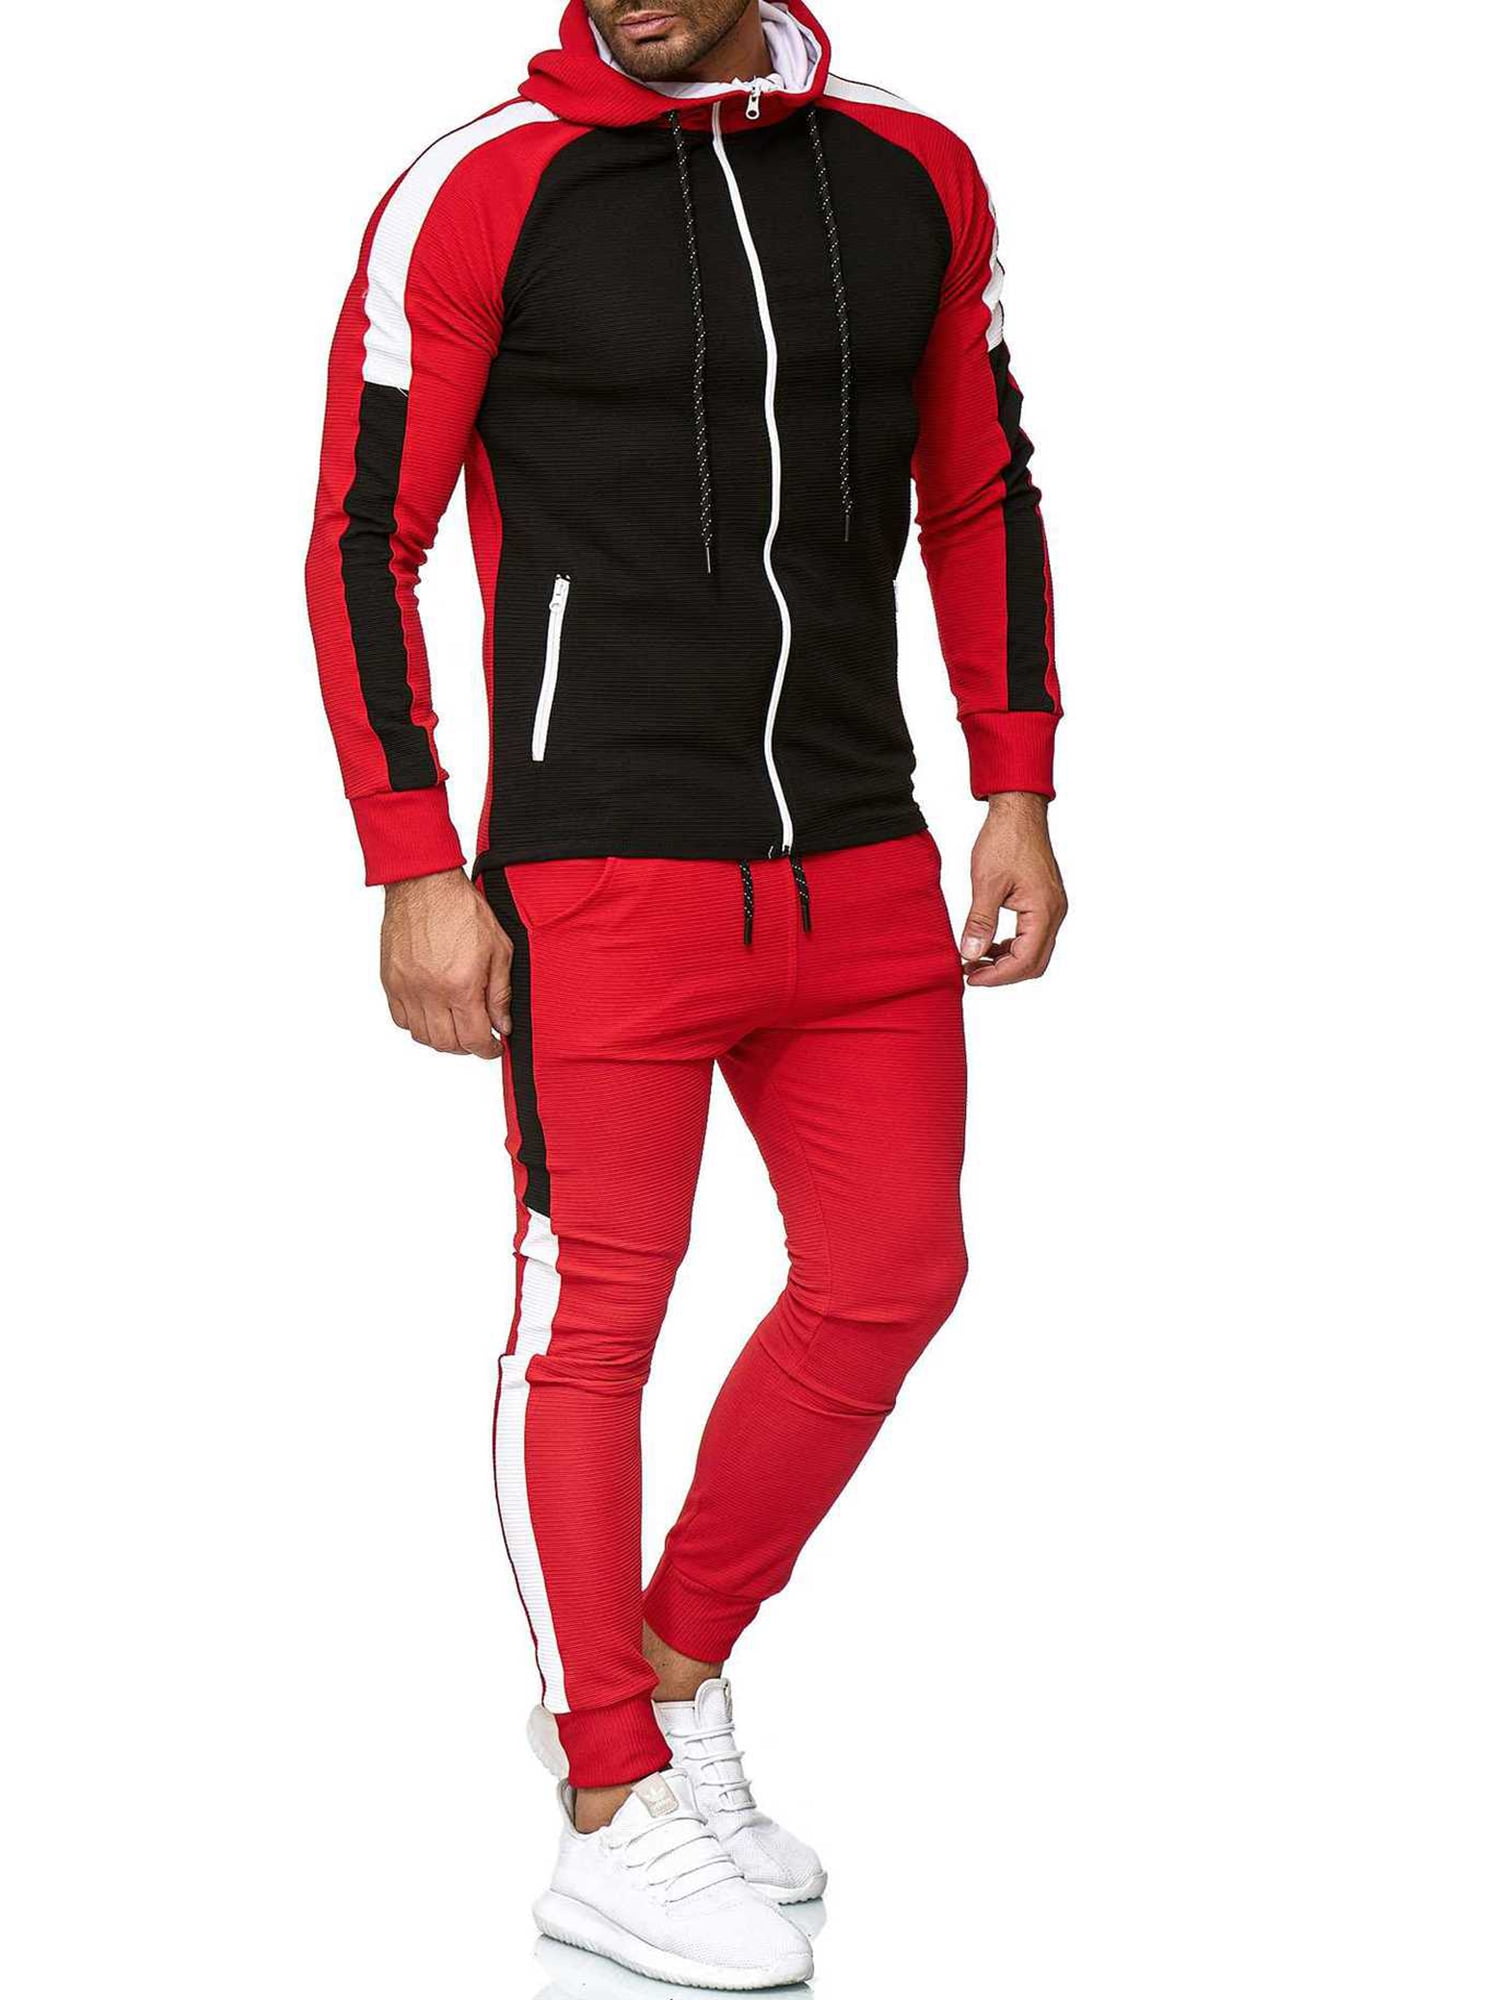 Mens Causal Tracksuits Set Long Sleeve 2 Pieces Sportwear Suits